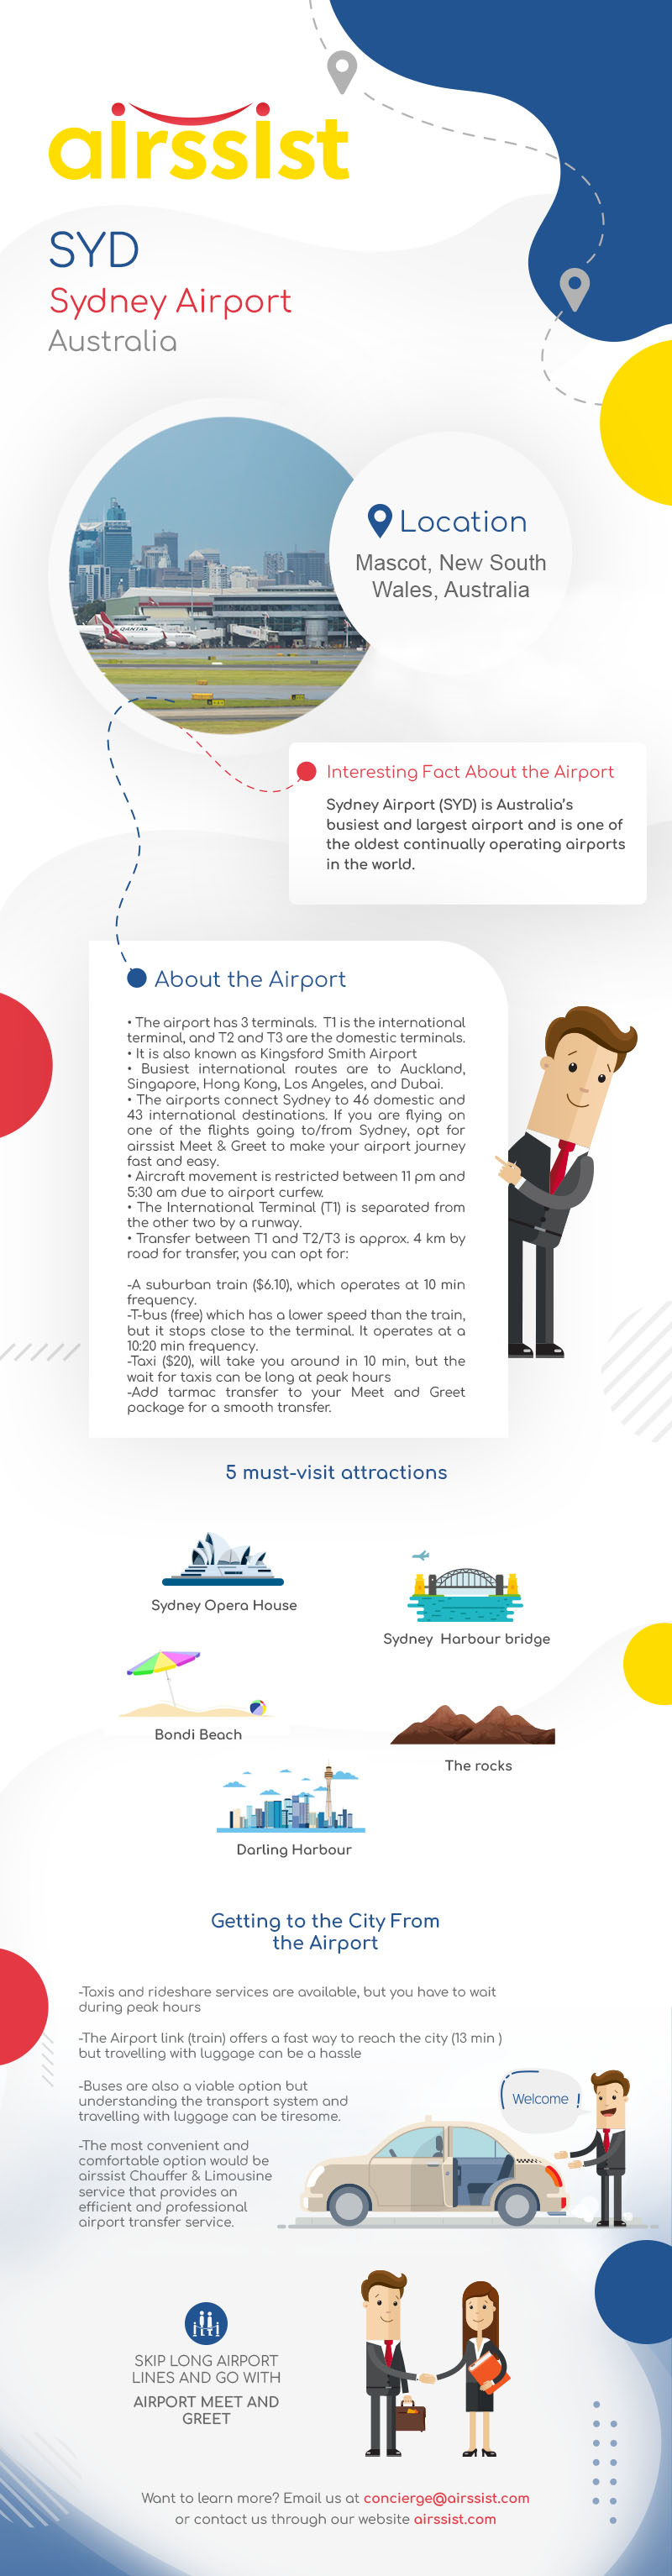 infoghraphic About Sydney airport meet and greet and other airport services